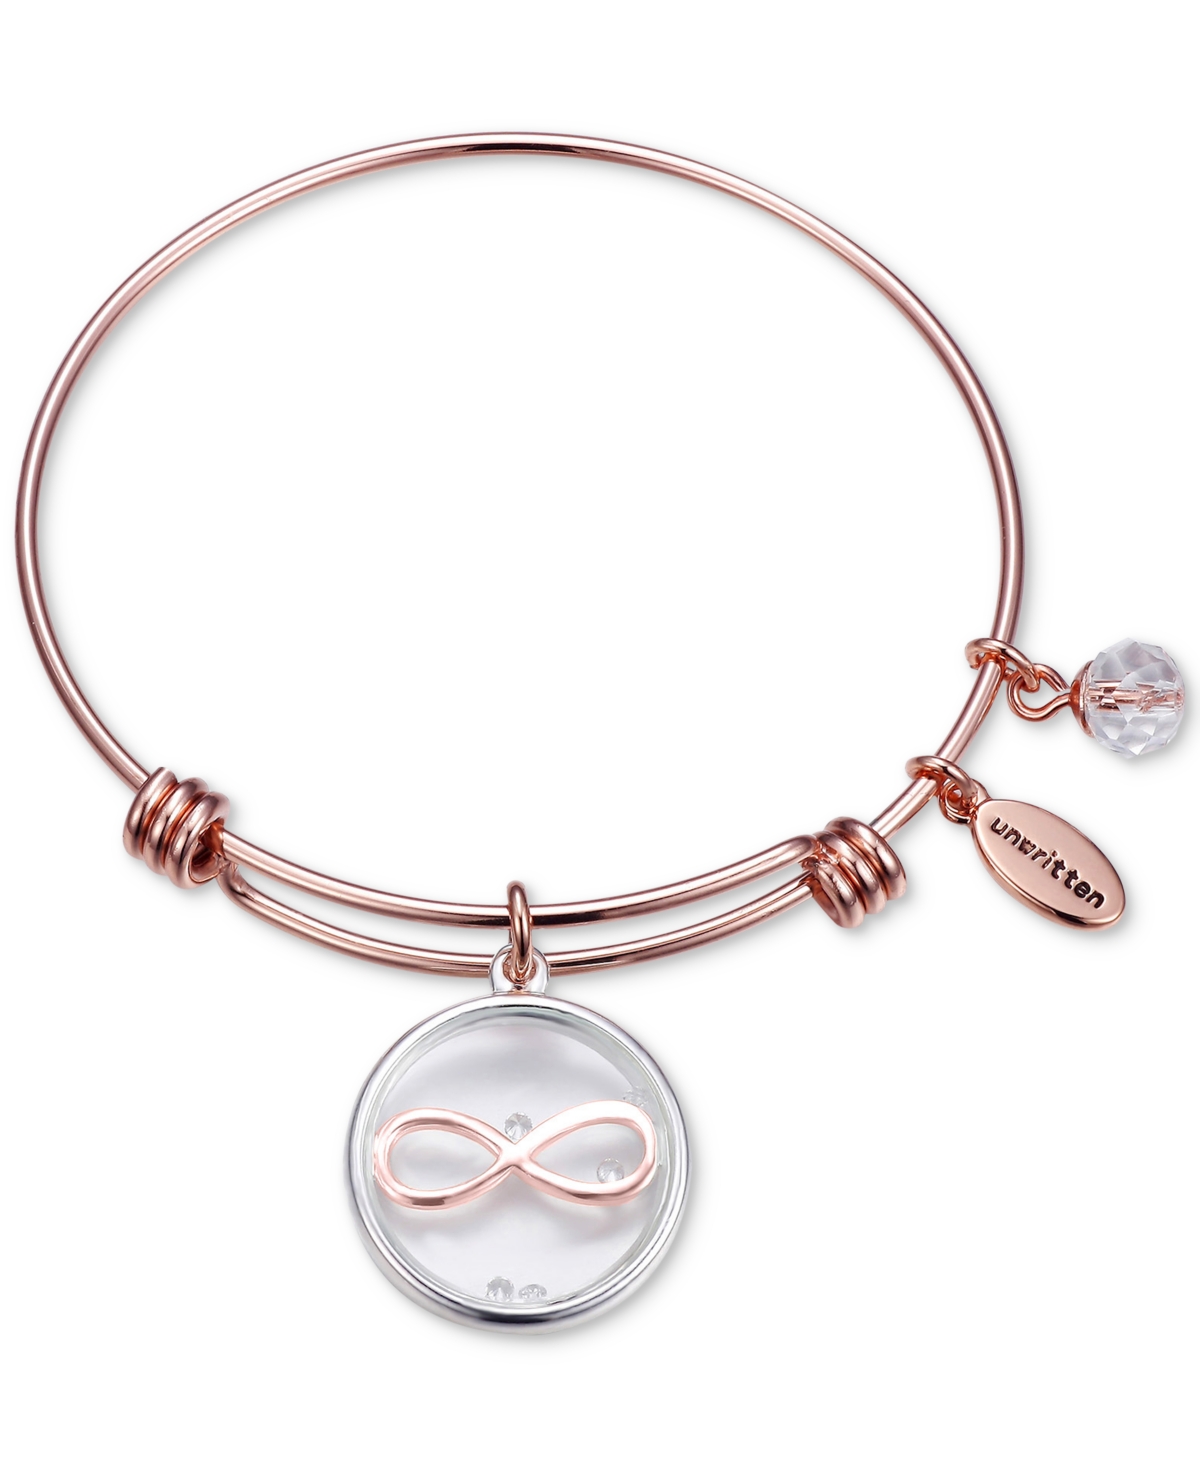 Infinity Glass Shaker Charm Adjustable Bangle Bracelet in Rose Gold-Tone Stainless Steel with Silver Plated Charms - Two Tone